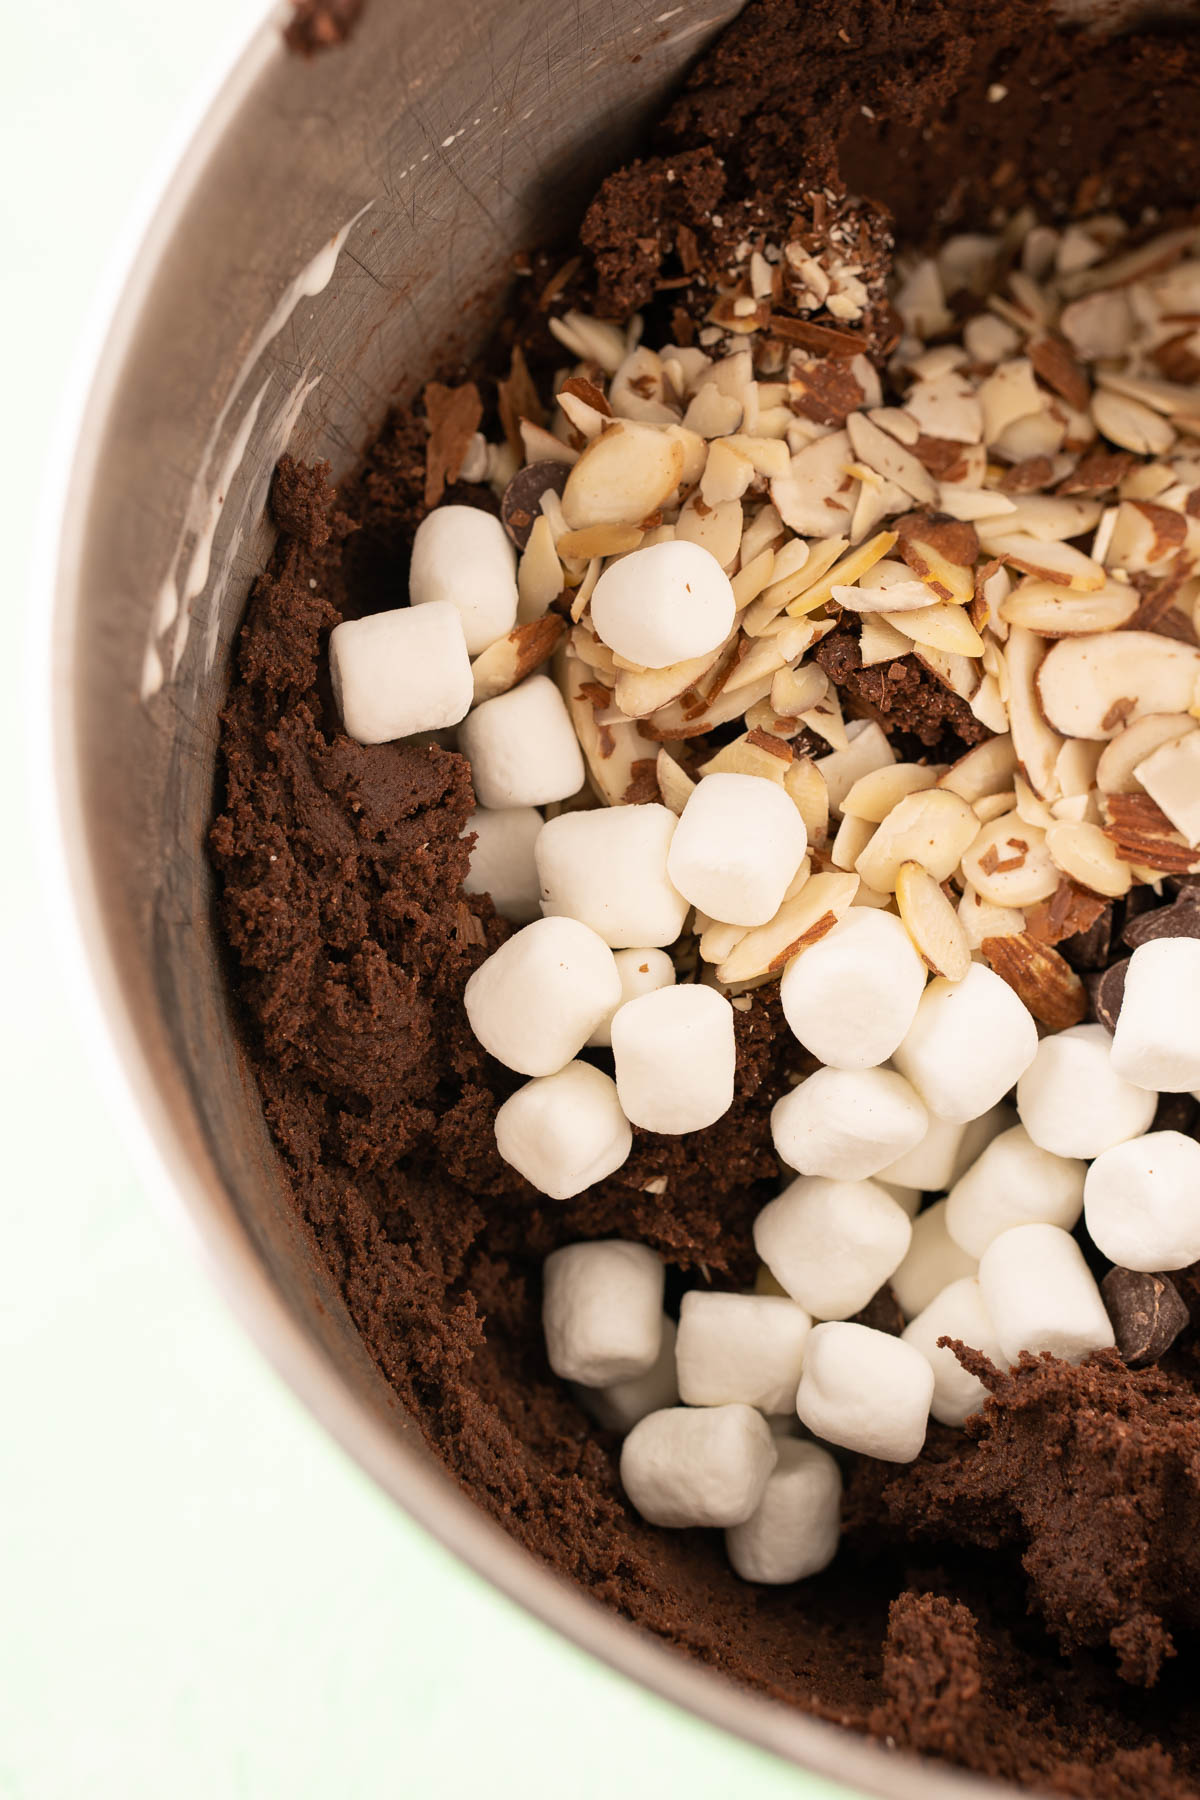 Chocolate cookie dough in a stainless steel mixing bowl with marshmallows, almonds, and chocolate chips being added in.